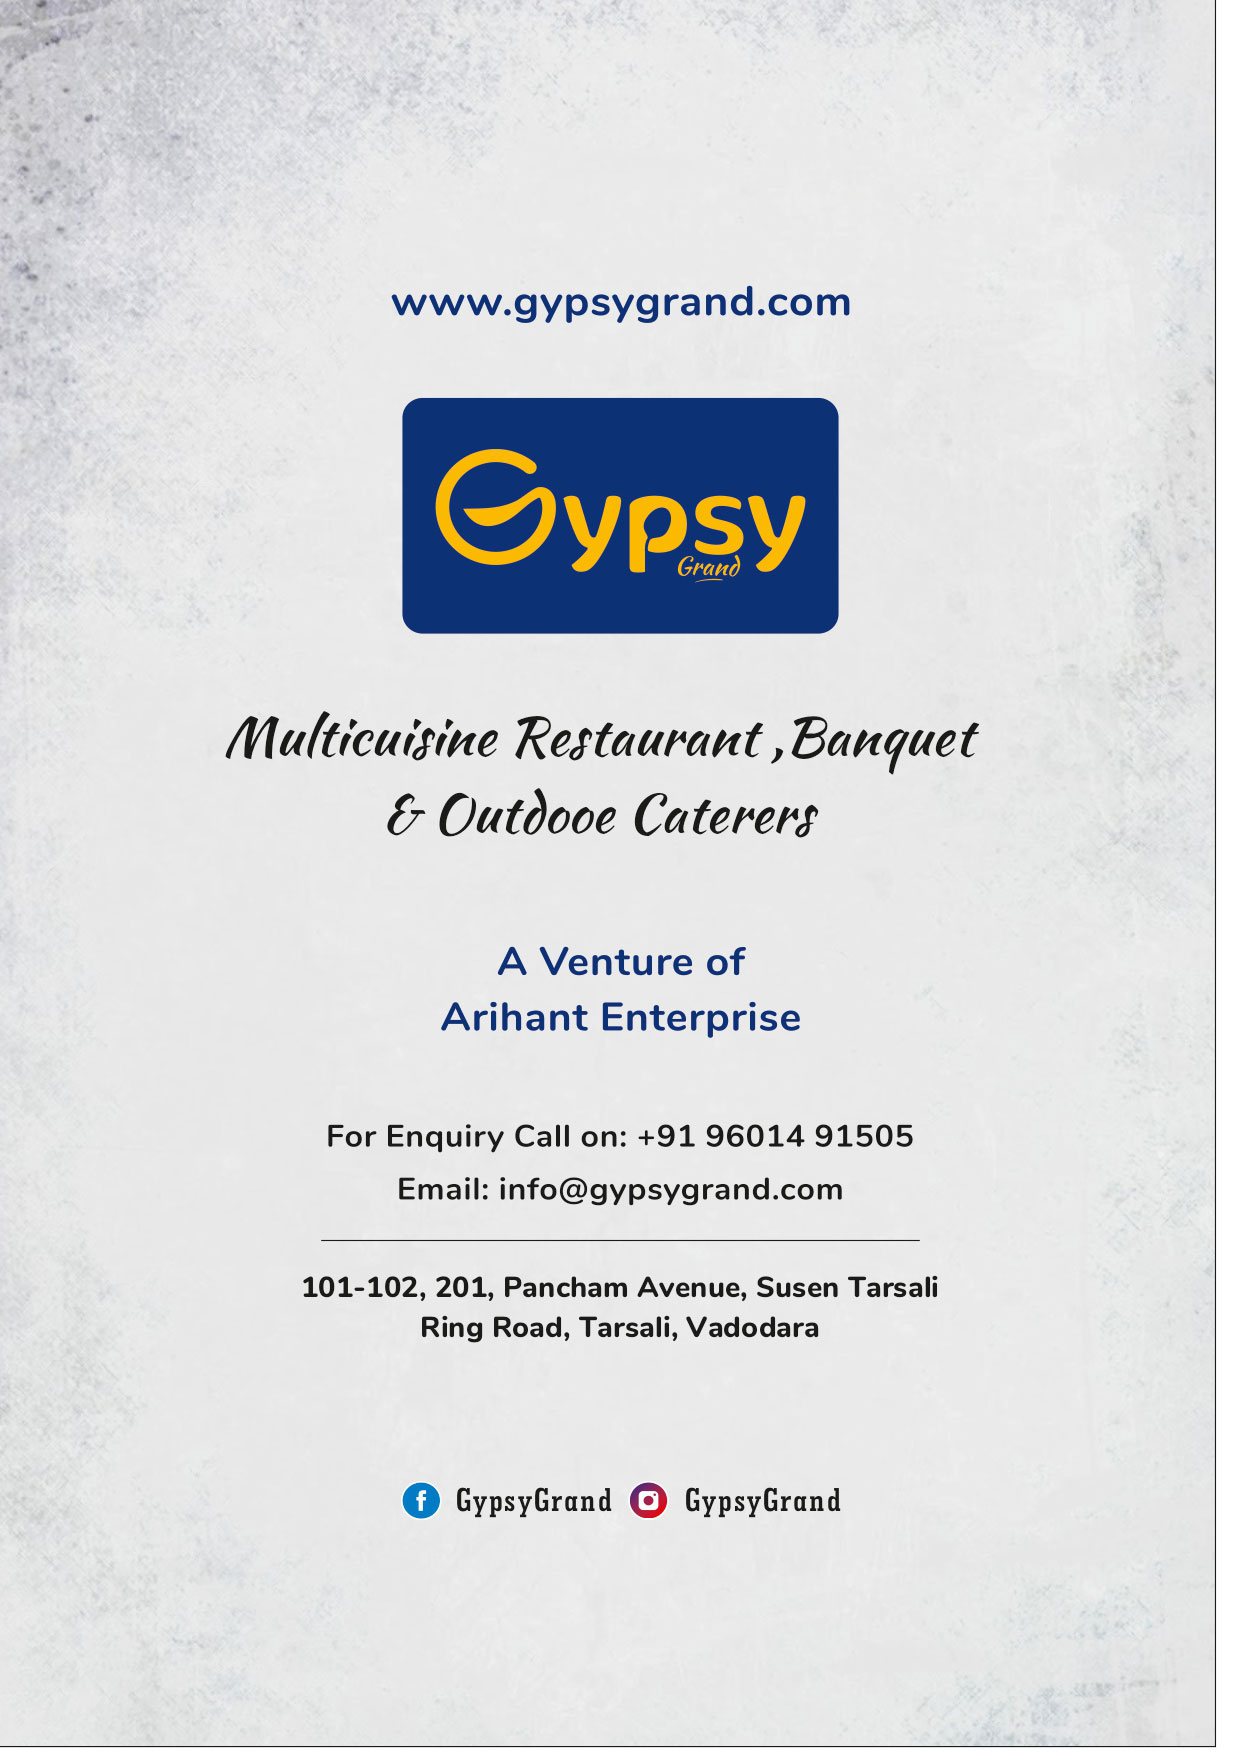 GypsyGrand - Do You Live In Tarsali, Makarpura Or Manjalpur? Did You Know  At Gypsy Grand Restaurant You Get Served A Wide Variety Of BBQ Food Items?  Check Out These BBQ Menu